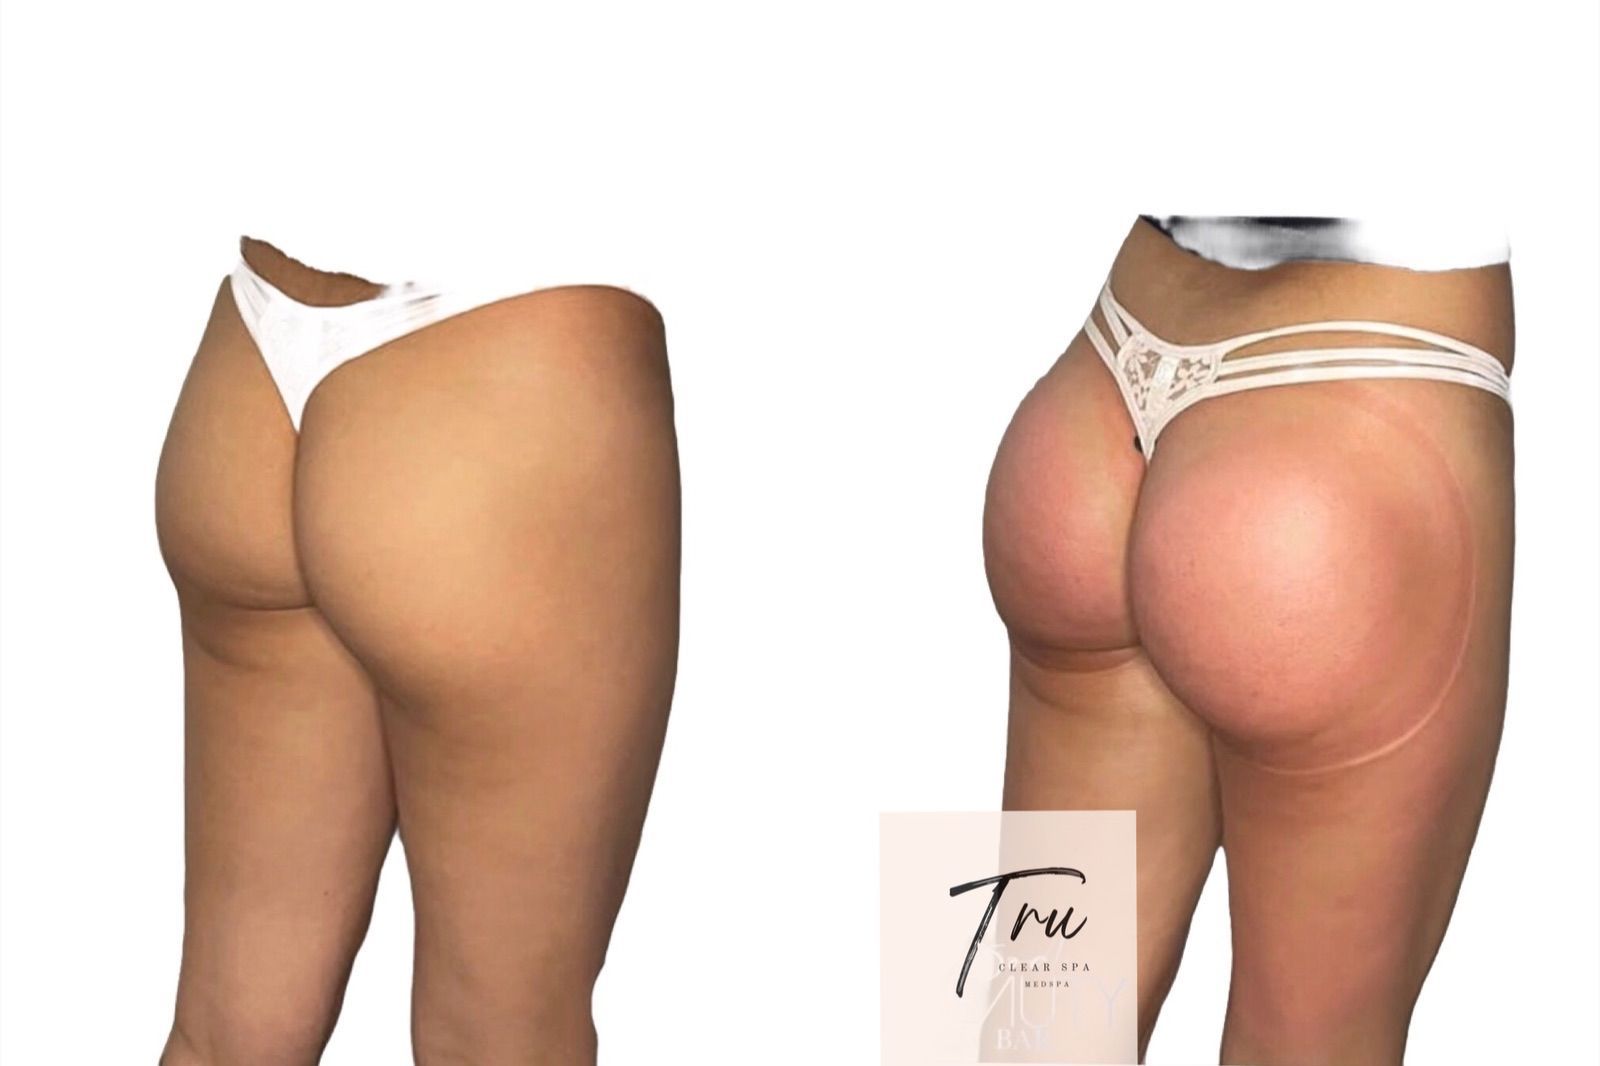 Advanced Body Sculpting - Colombian Butt Lift RESULTS 🔥 Are you looking to  enhance, lift and tone your buttocks? Our Colombian Butt Lift Treatment is  Perfect For YOU! 🍑 Our CBL Service